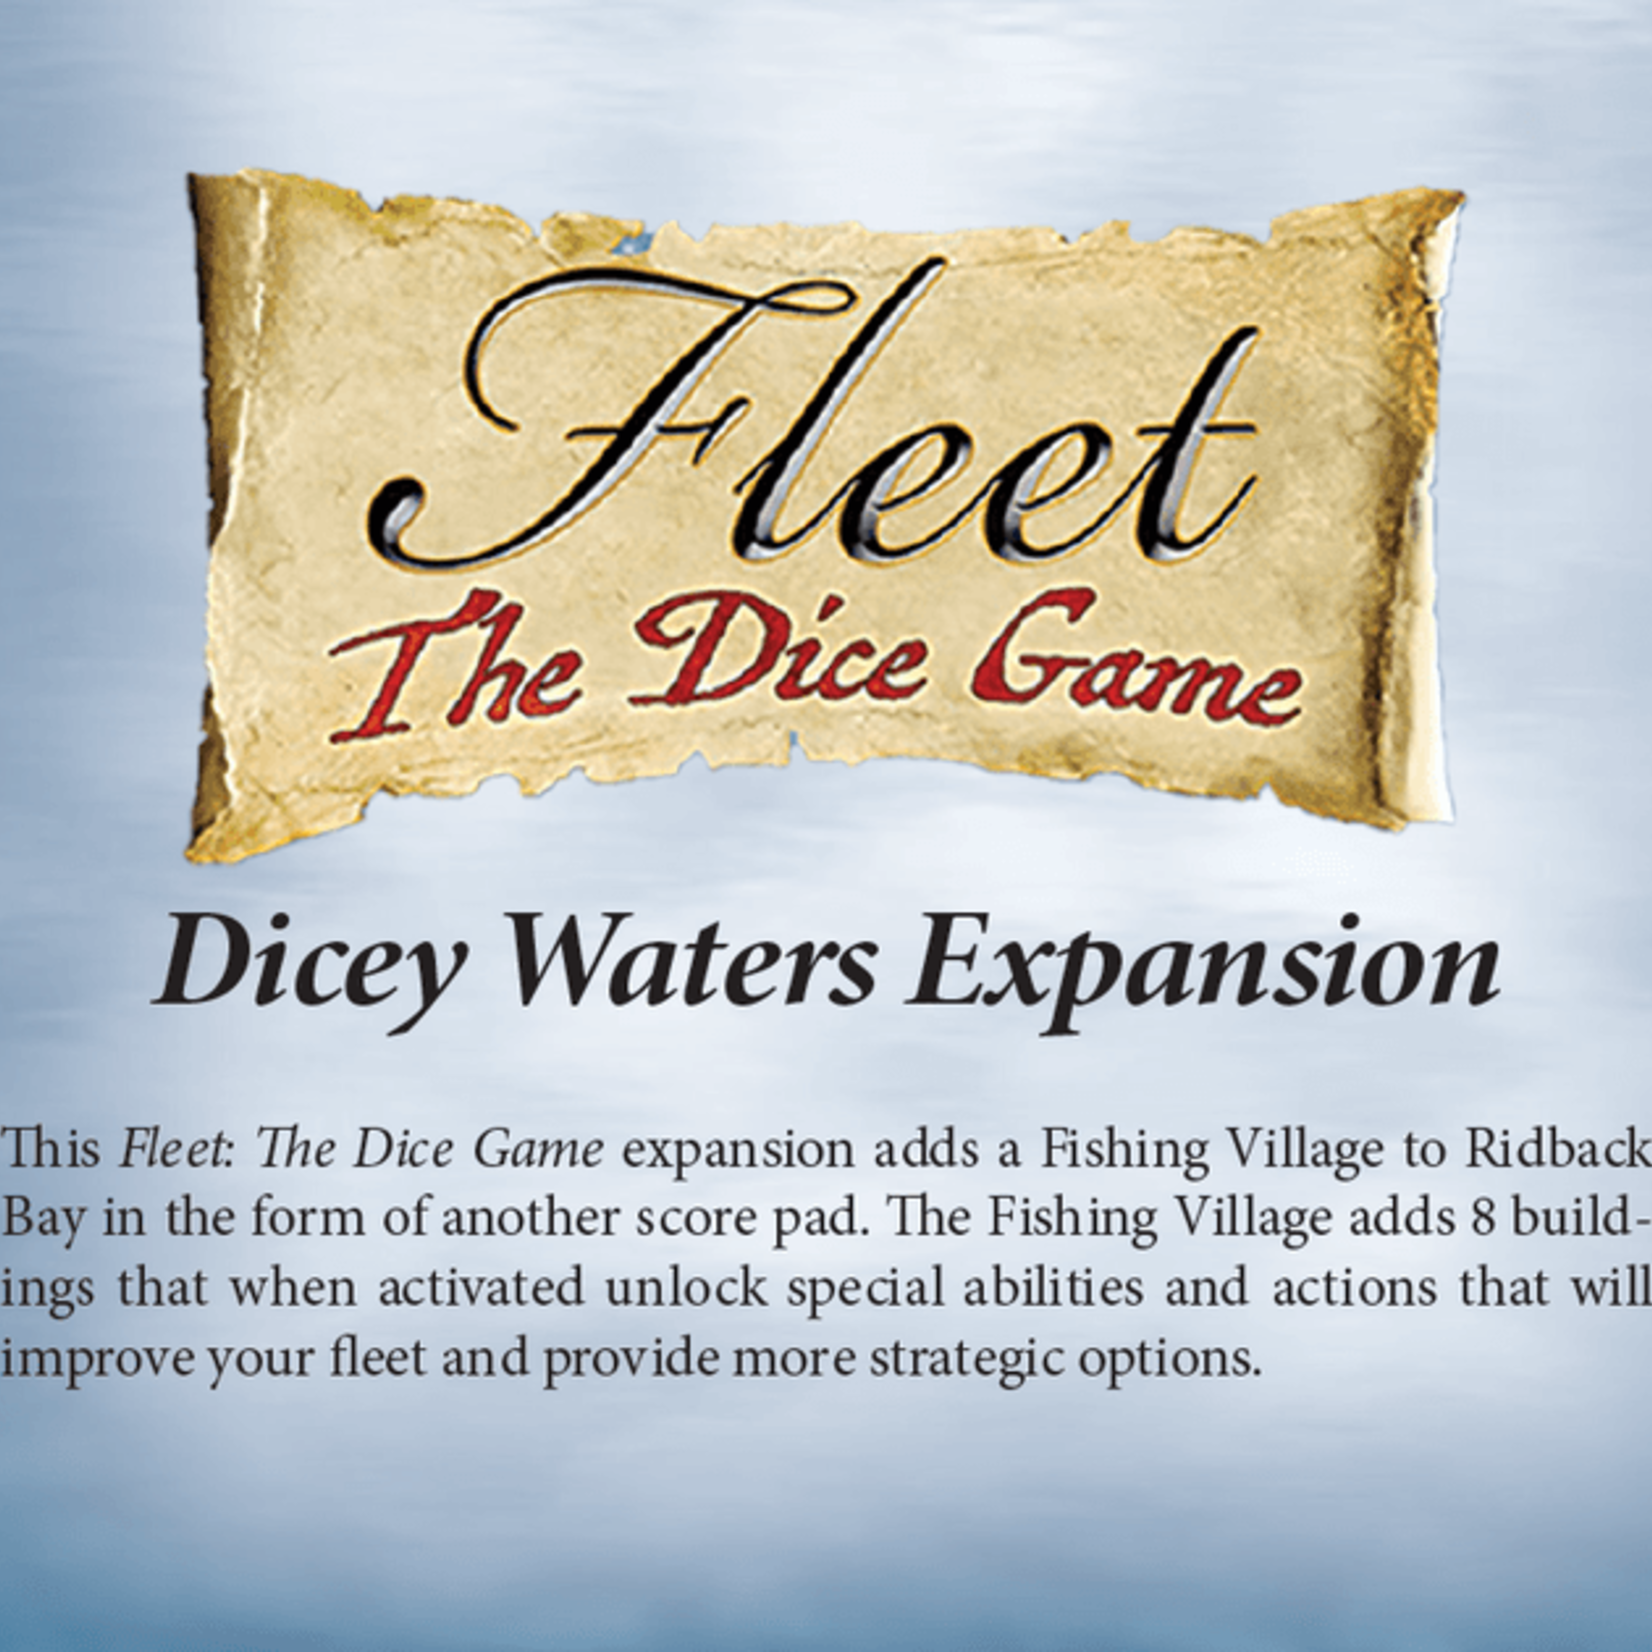 Eagle-Gryphon Games Fleet The Dice Game Dicey Waters Expansion